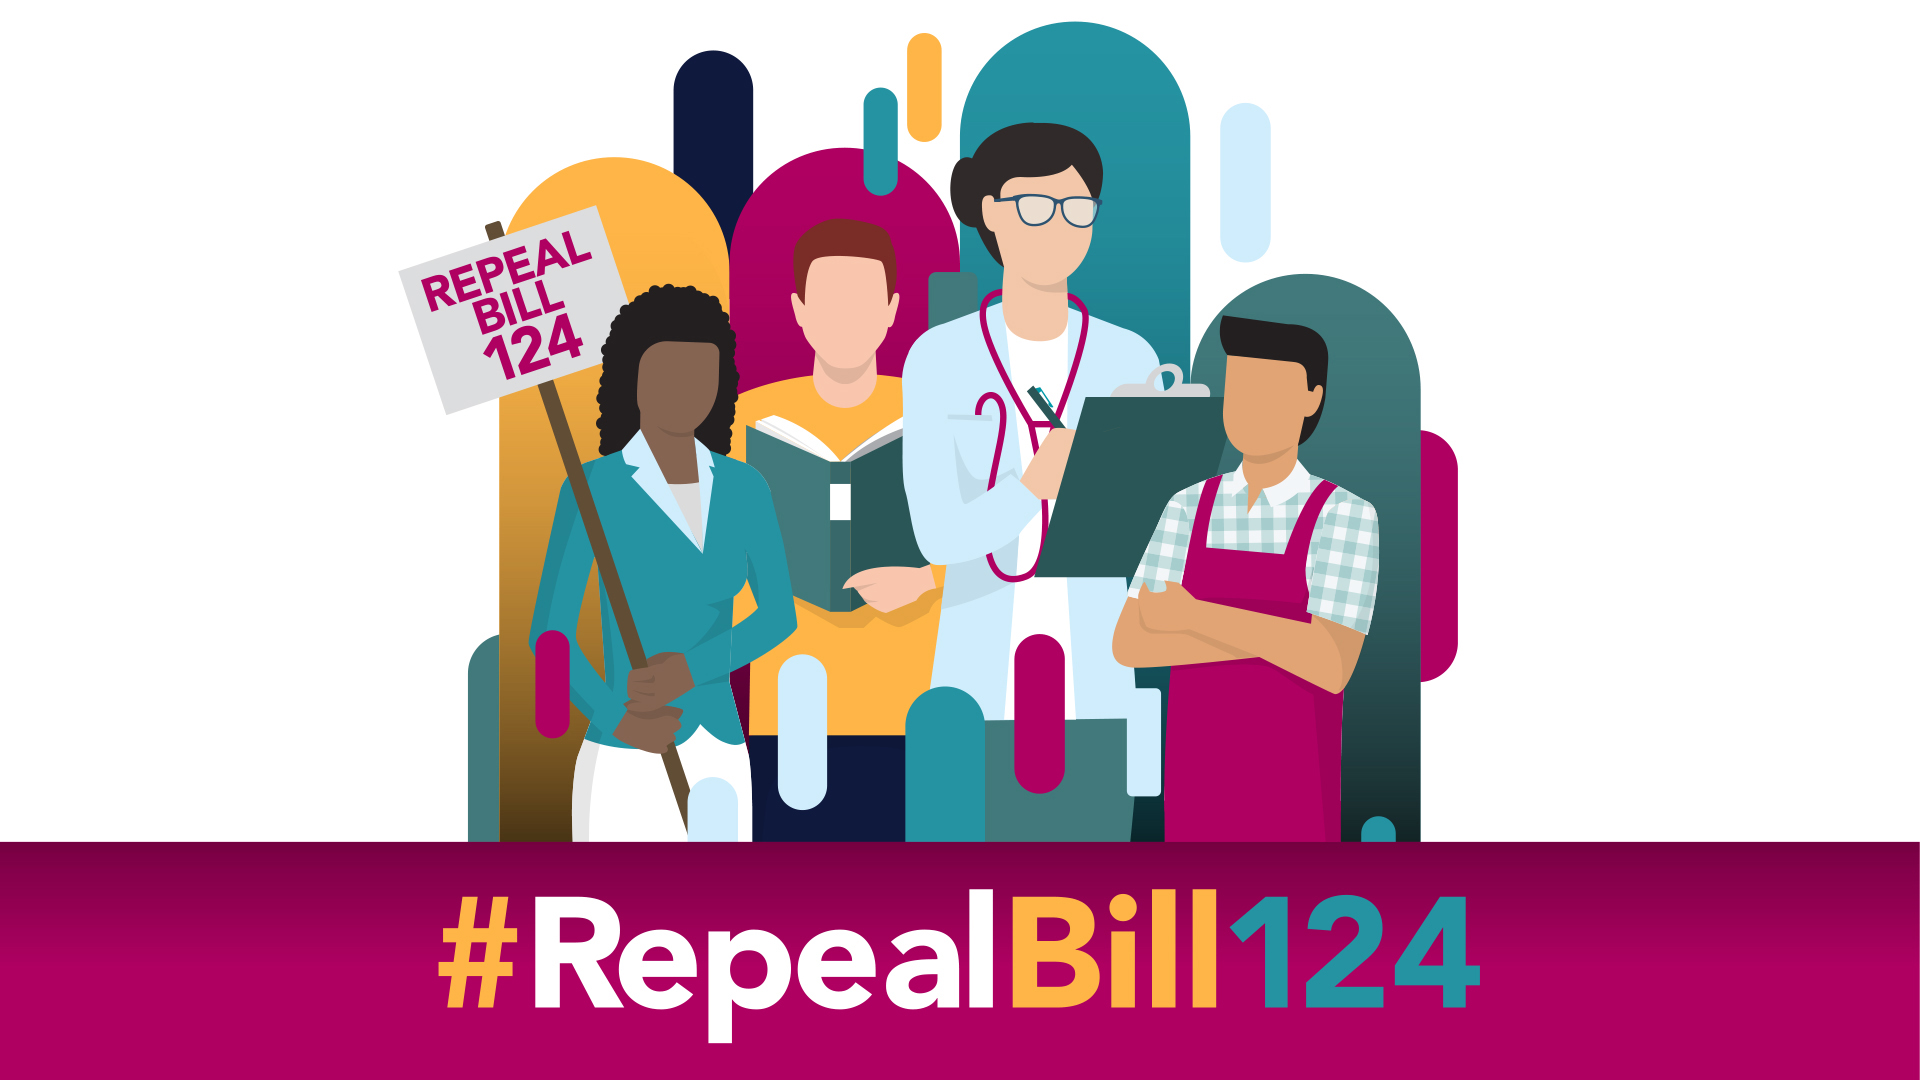 Image reads #RepealBill124 and shows four workers, representing different sector of work, standing together in protest.